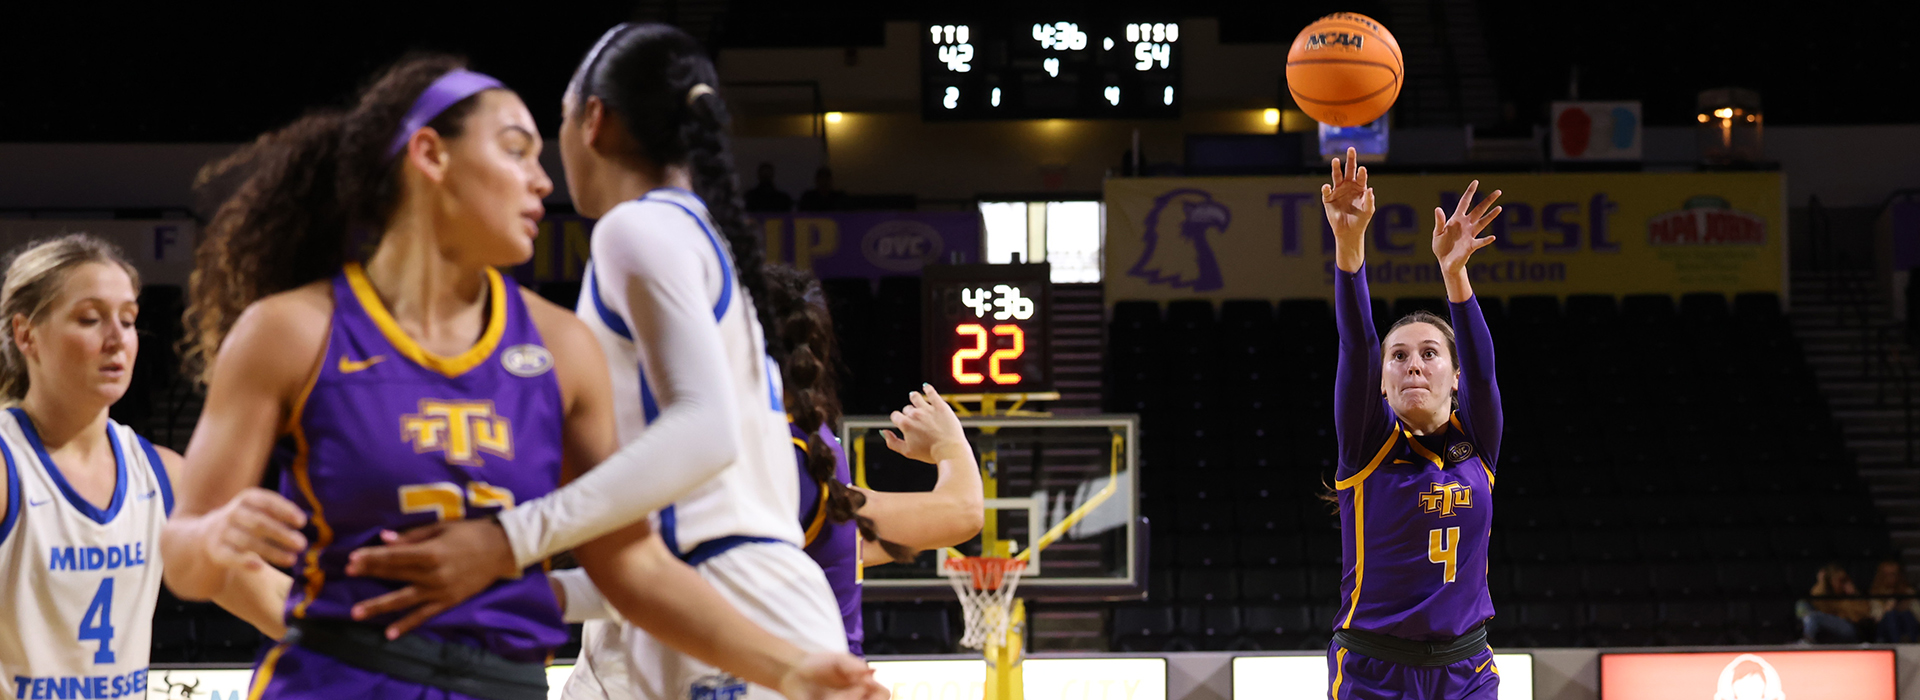 Tech women fight hard in loss to Middle Tennessee